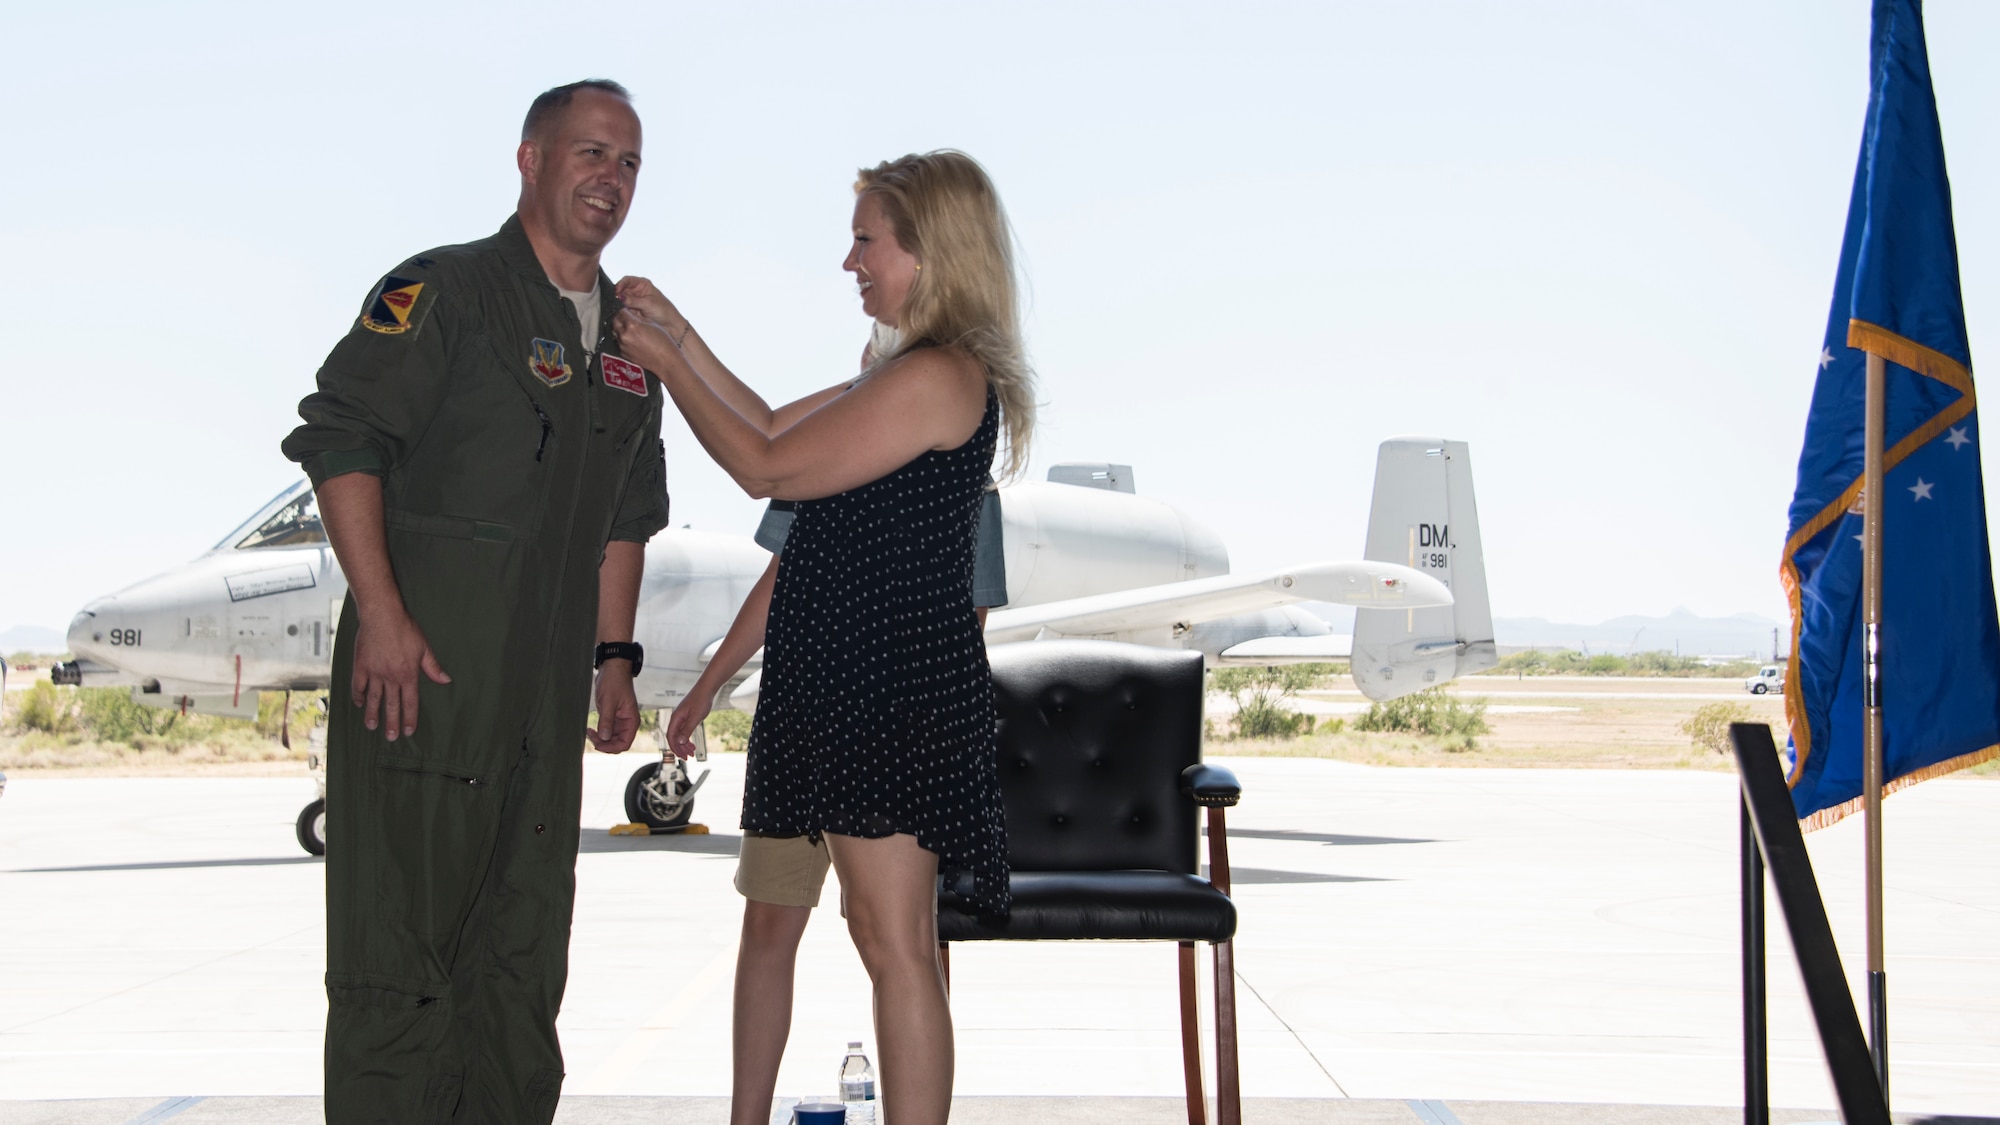 A photo of Col Hogan having his retirement pin pinned on